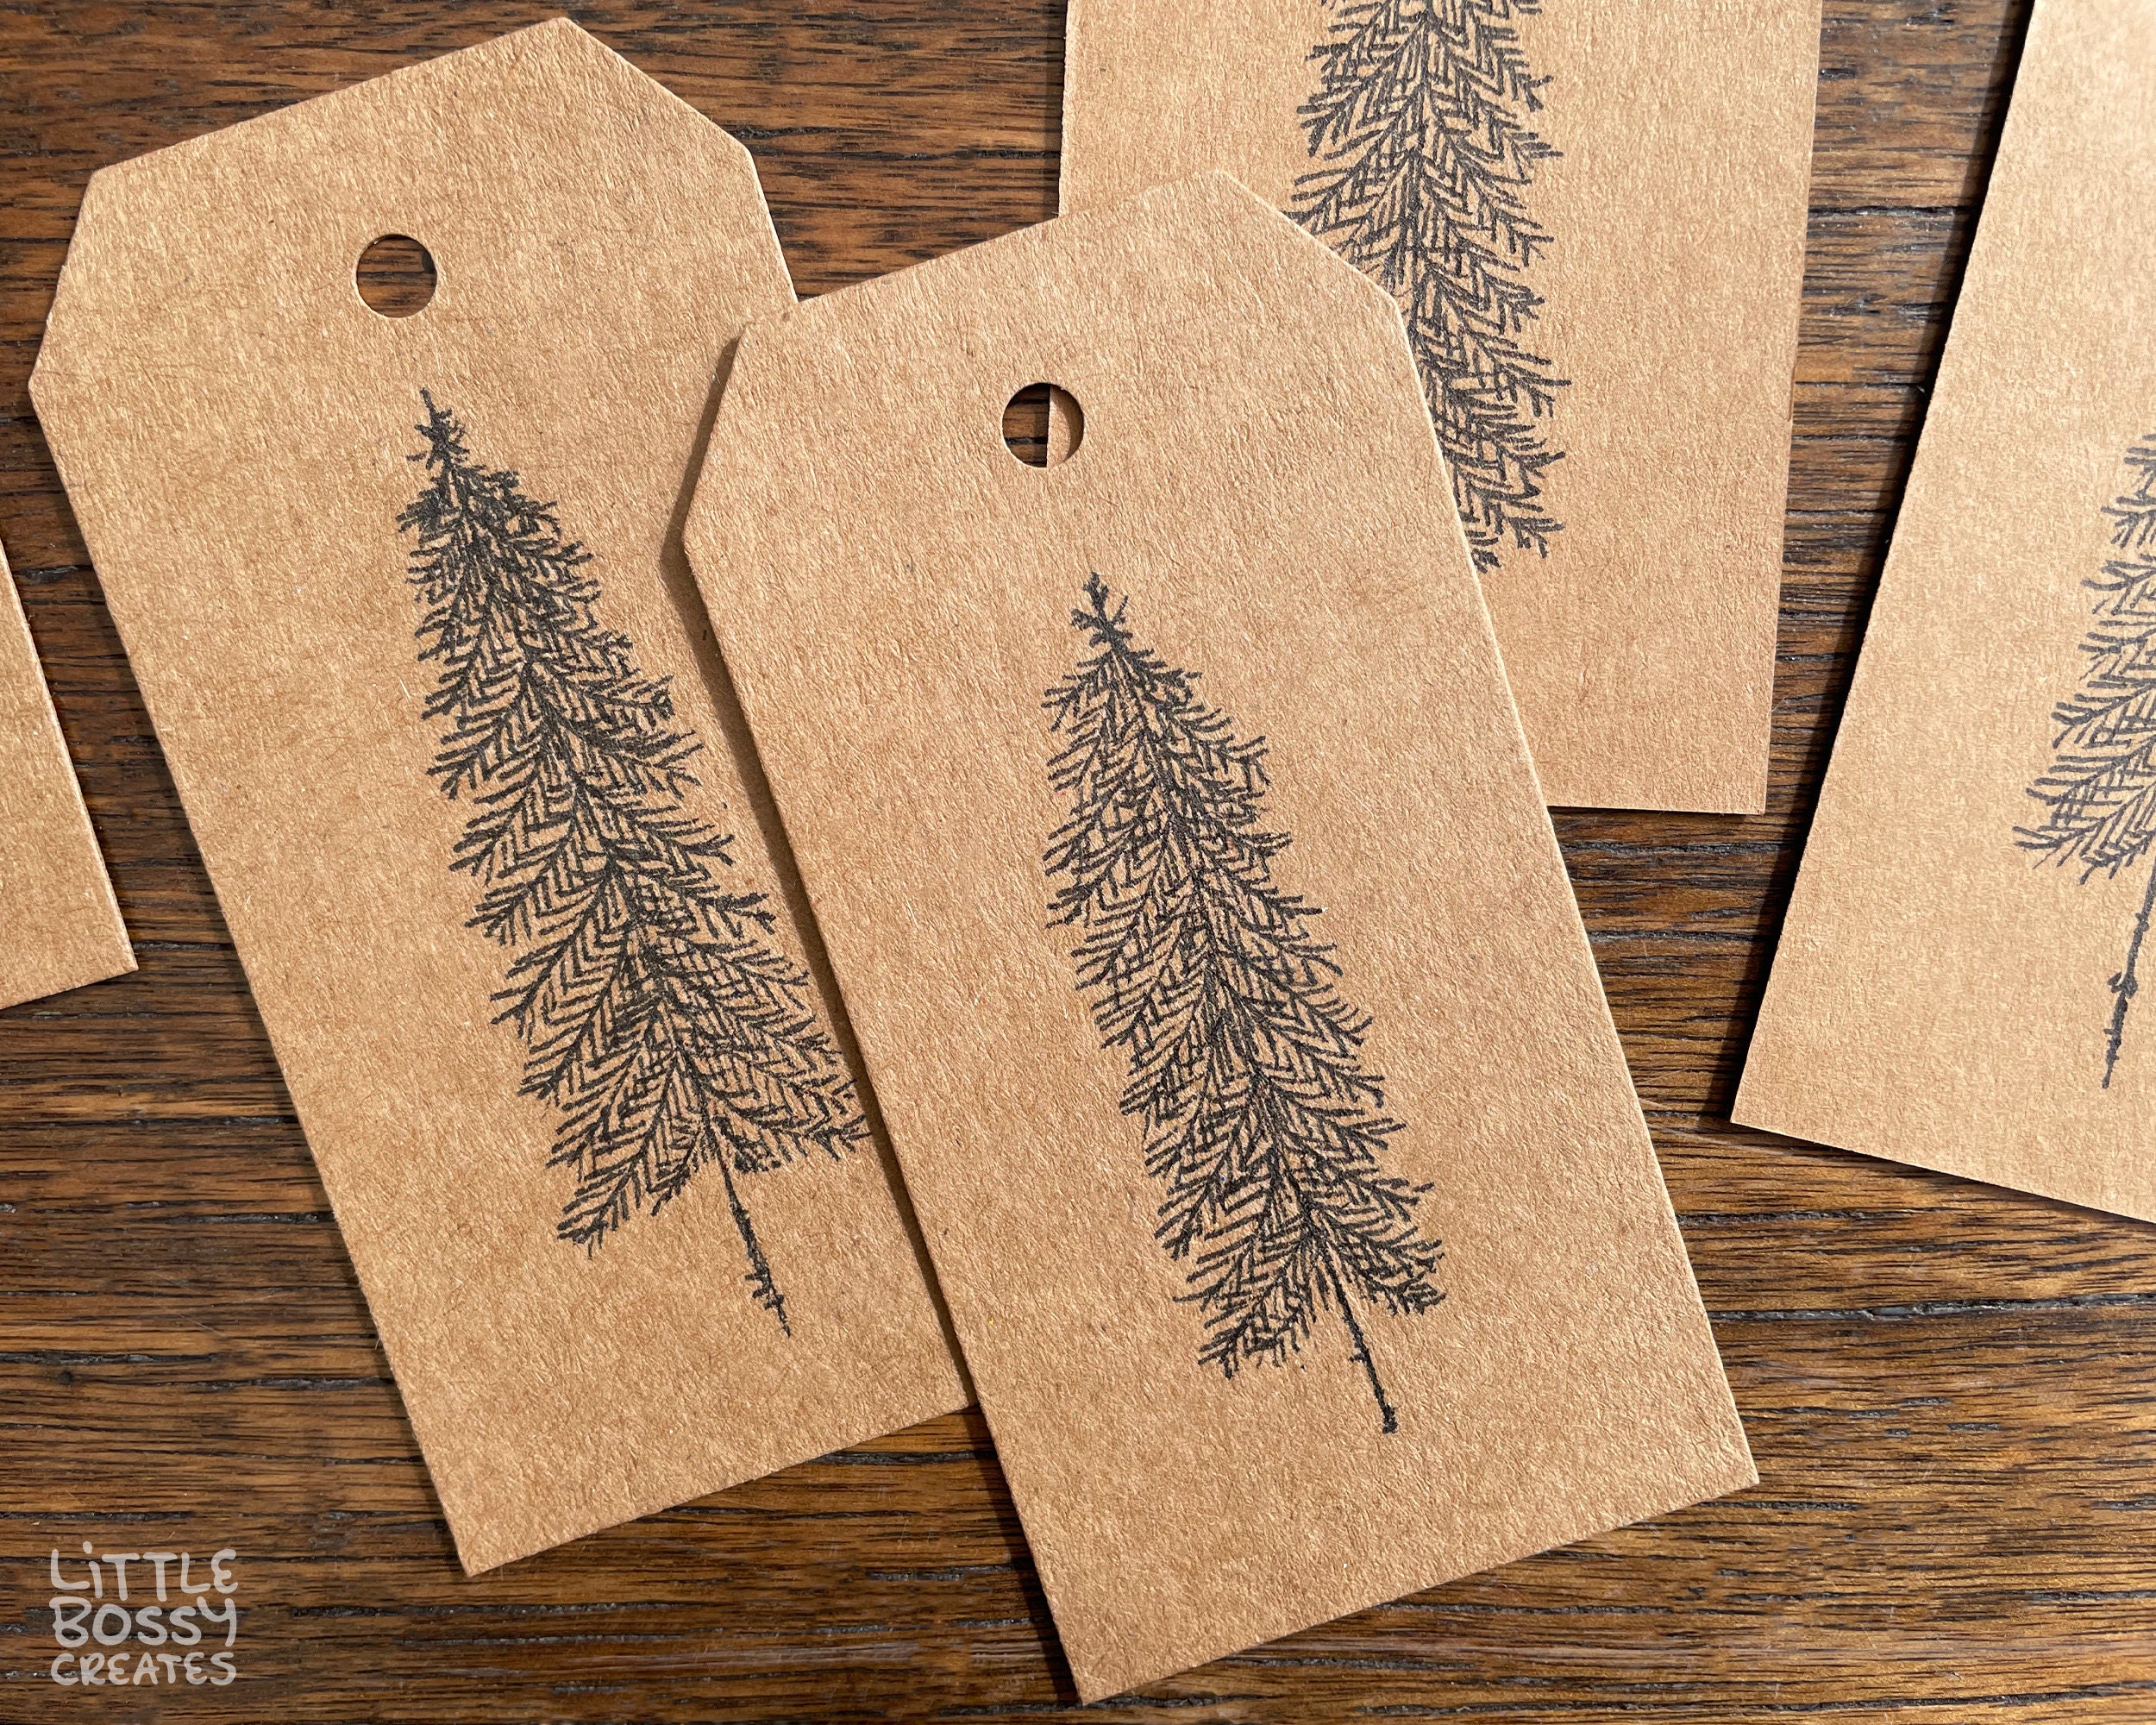 Rustic Christmas Gift Tags With Strings, Bear Christmas Tags for Gifts,  Peace on Earth Gift Tags Set, Large Christmas Gift Tags Set of 10 